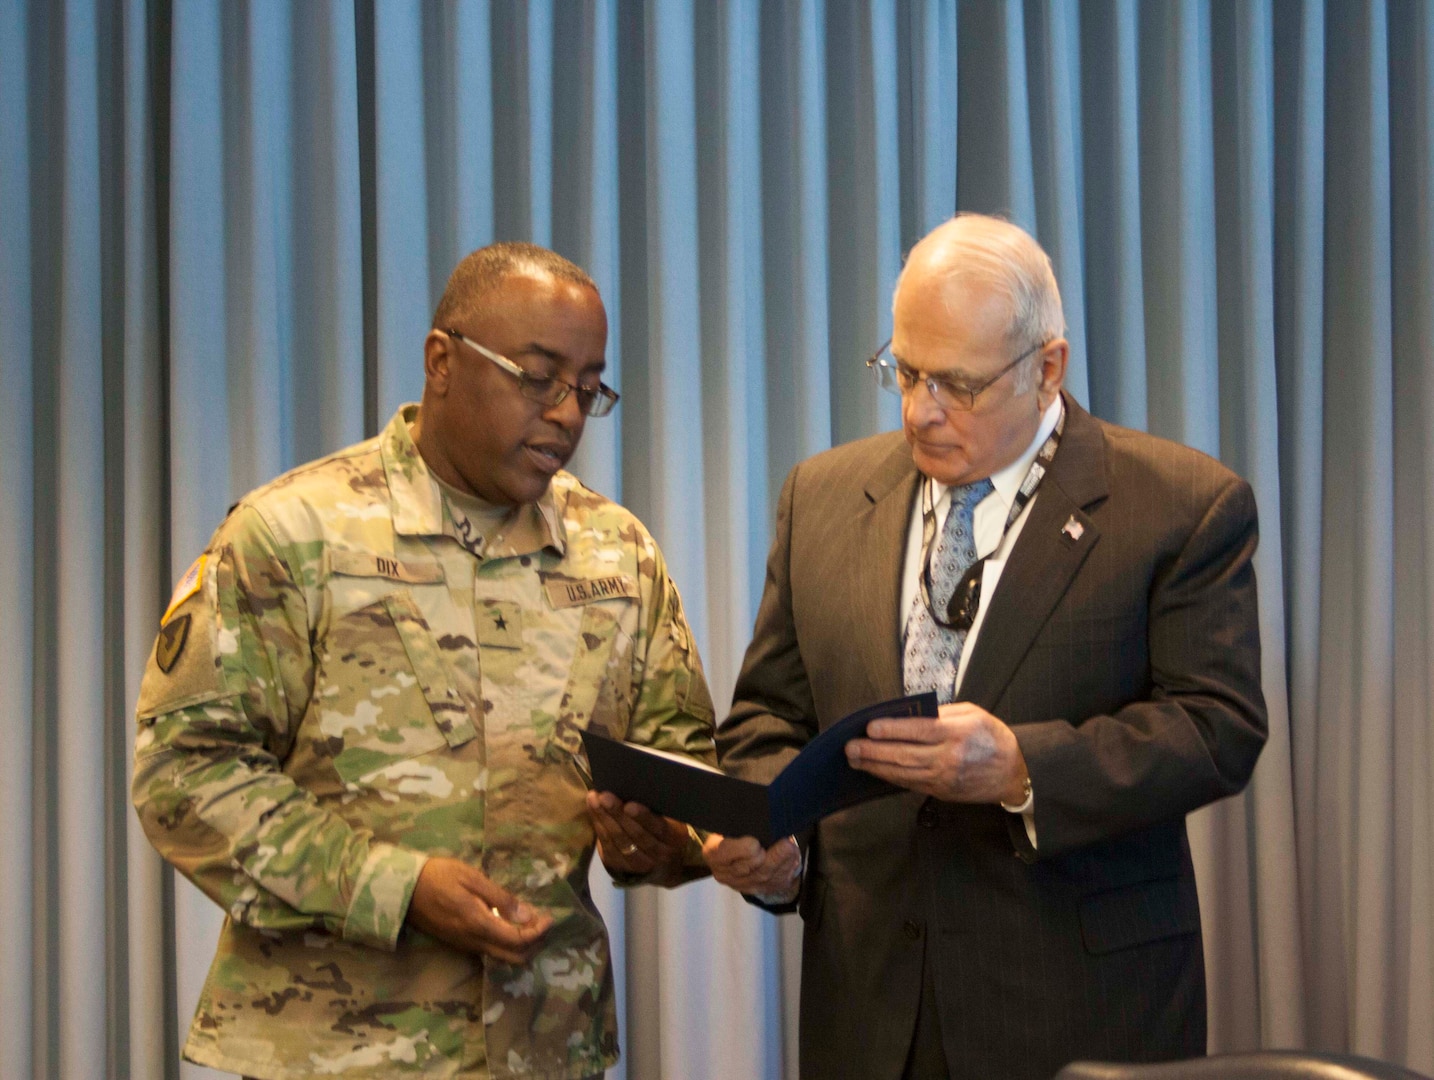 Army Brig. Gen. Richard Dix honors Joseph Spielbauer during a ceremony at DLA Distribution Jan. 28.